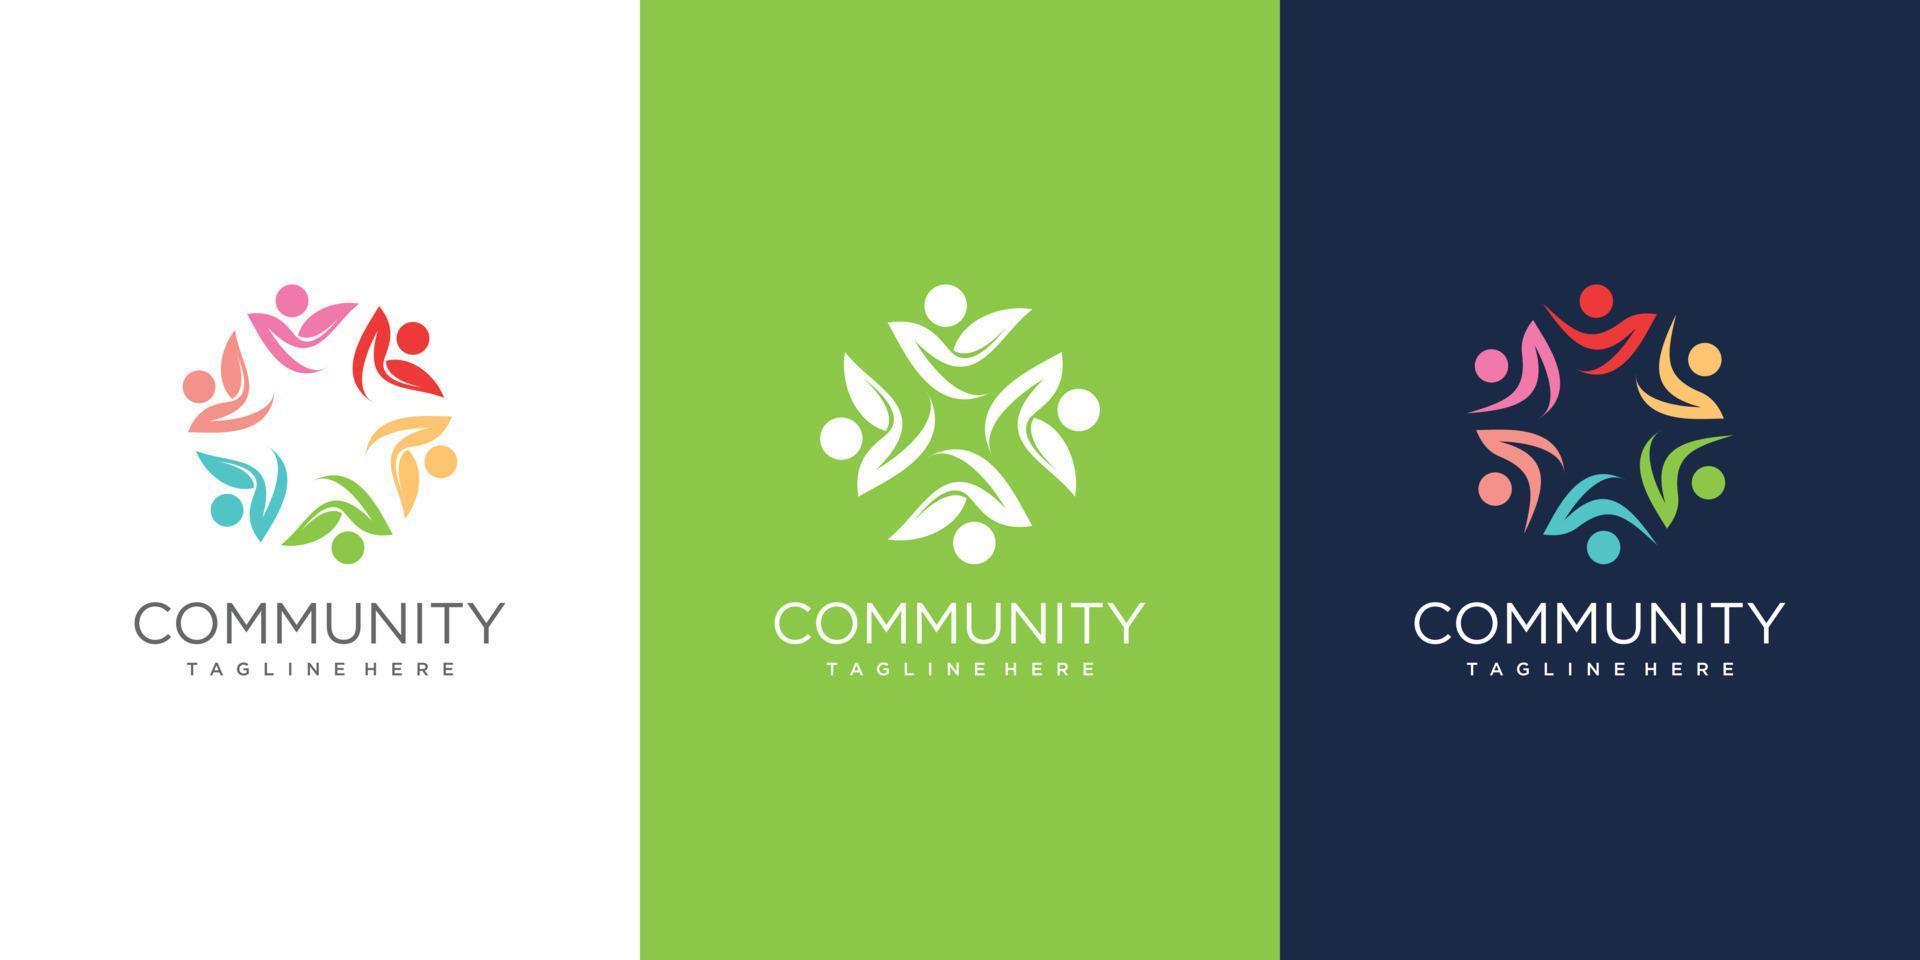 Community logo design concept with abstract style Premium Vector ...